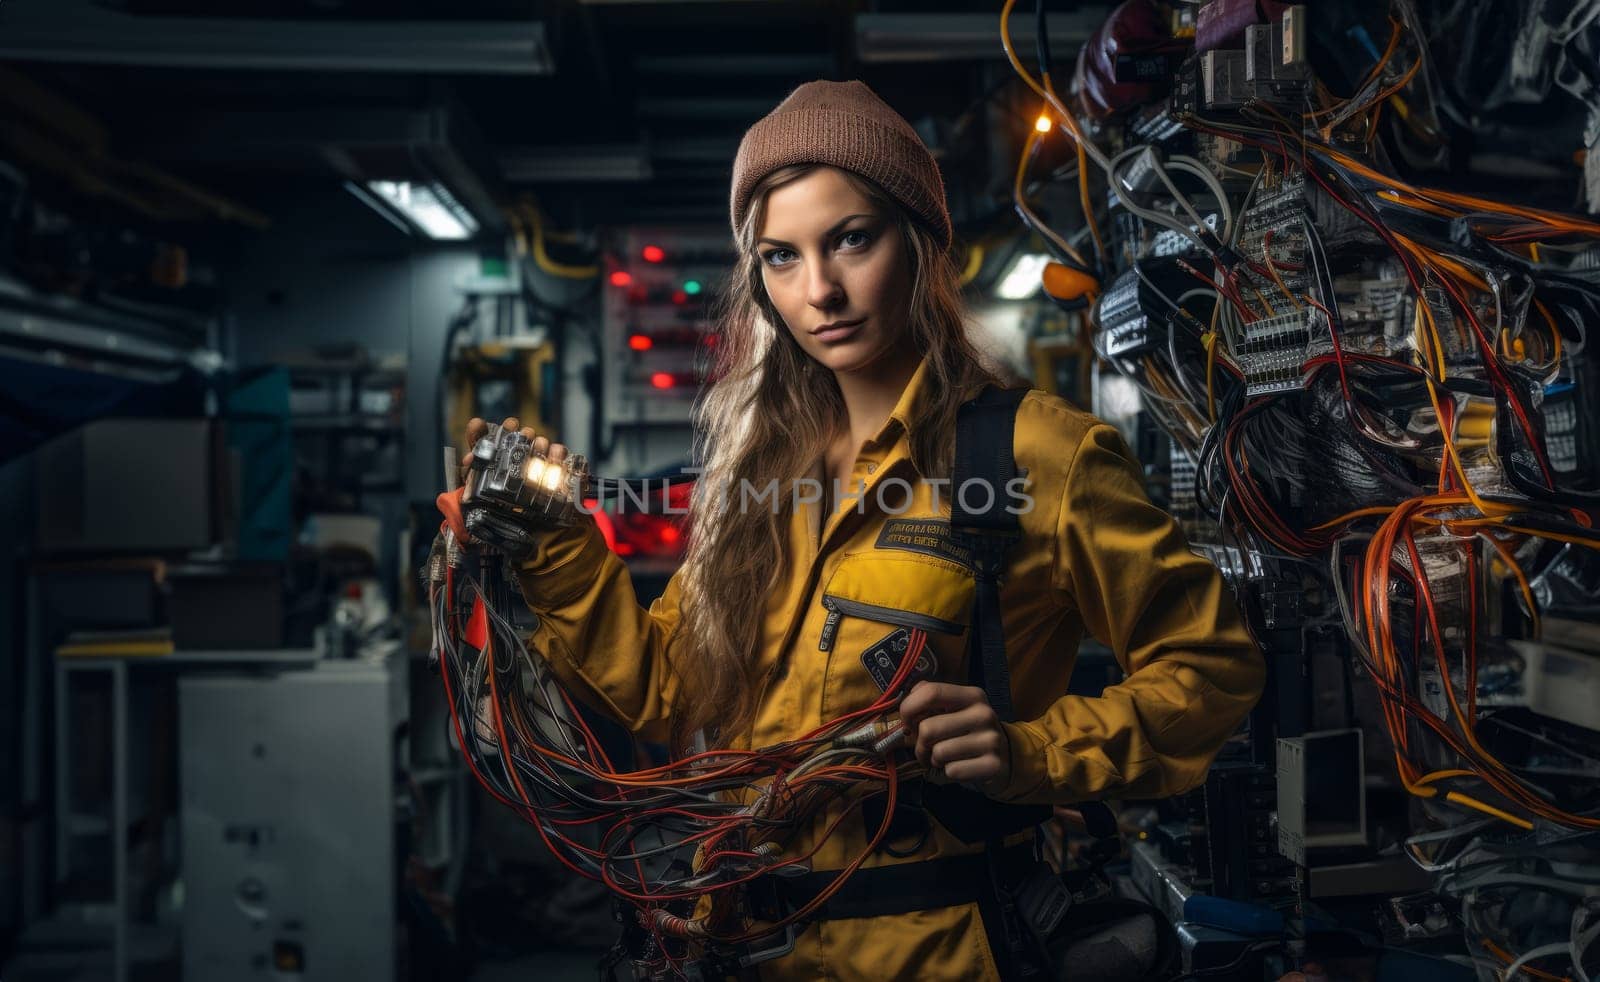 scene of technical expertise, a woman adeptly navigates an electronics service environment, surrounded by modern computers and cables, showcasing her skillful repair and maintenance abilities